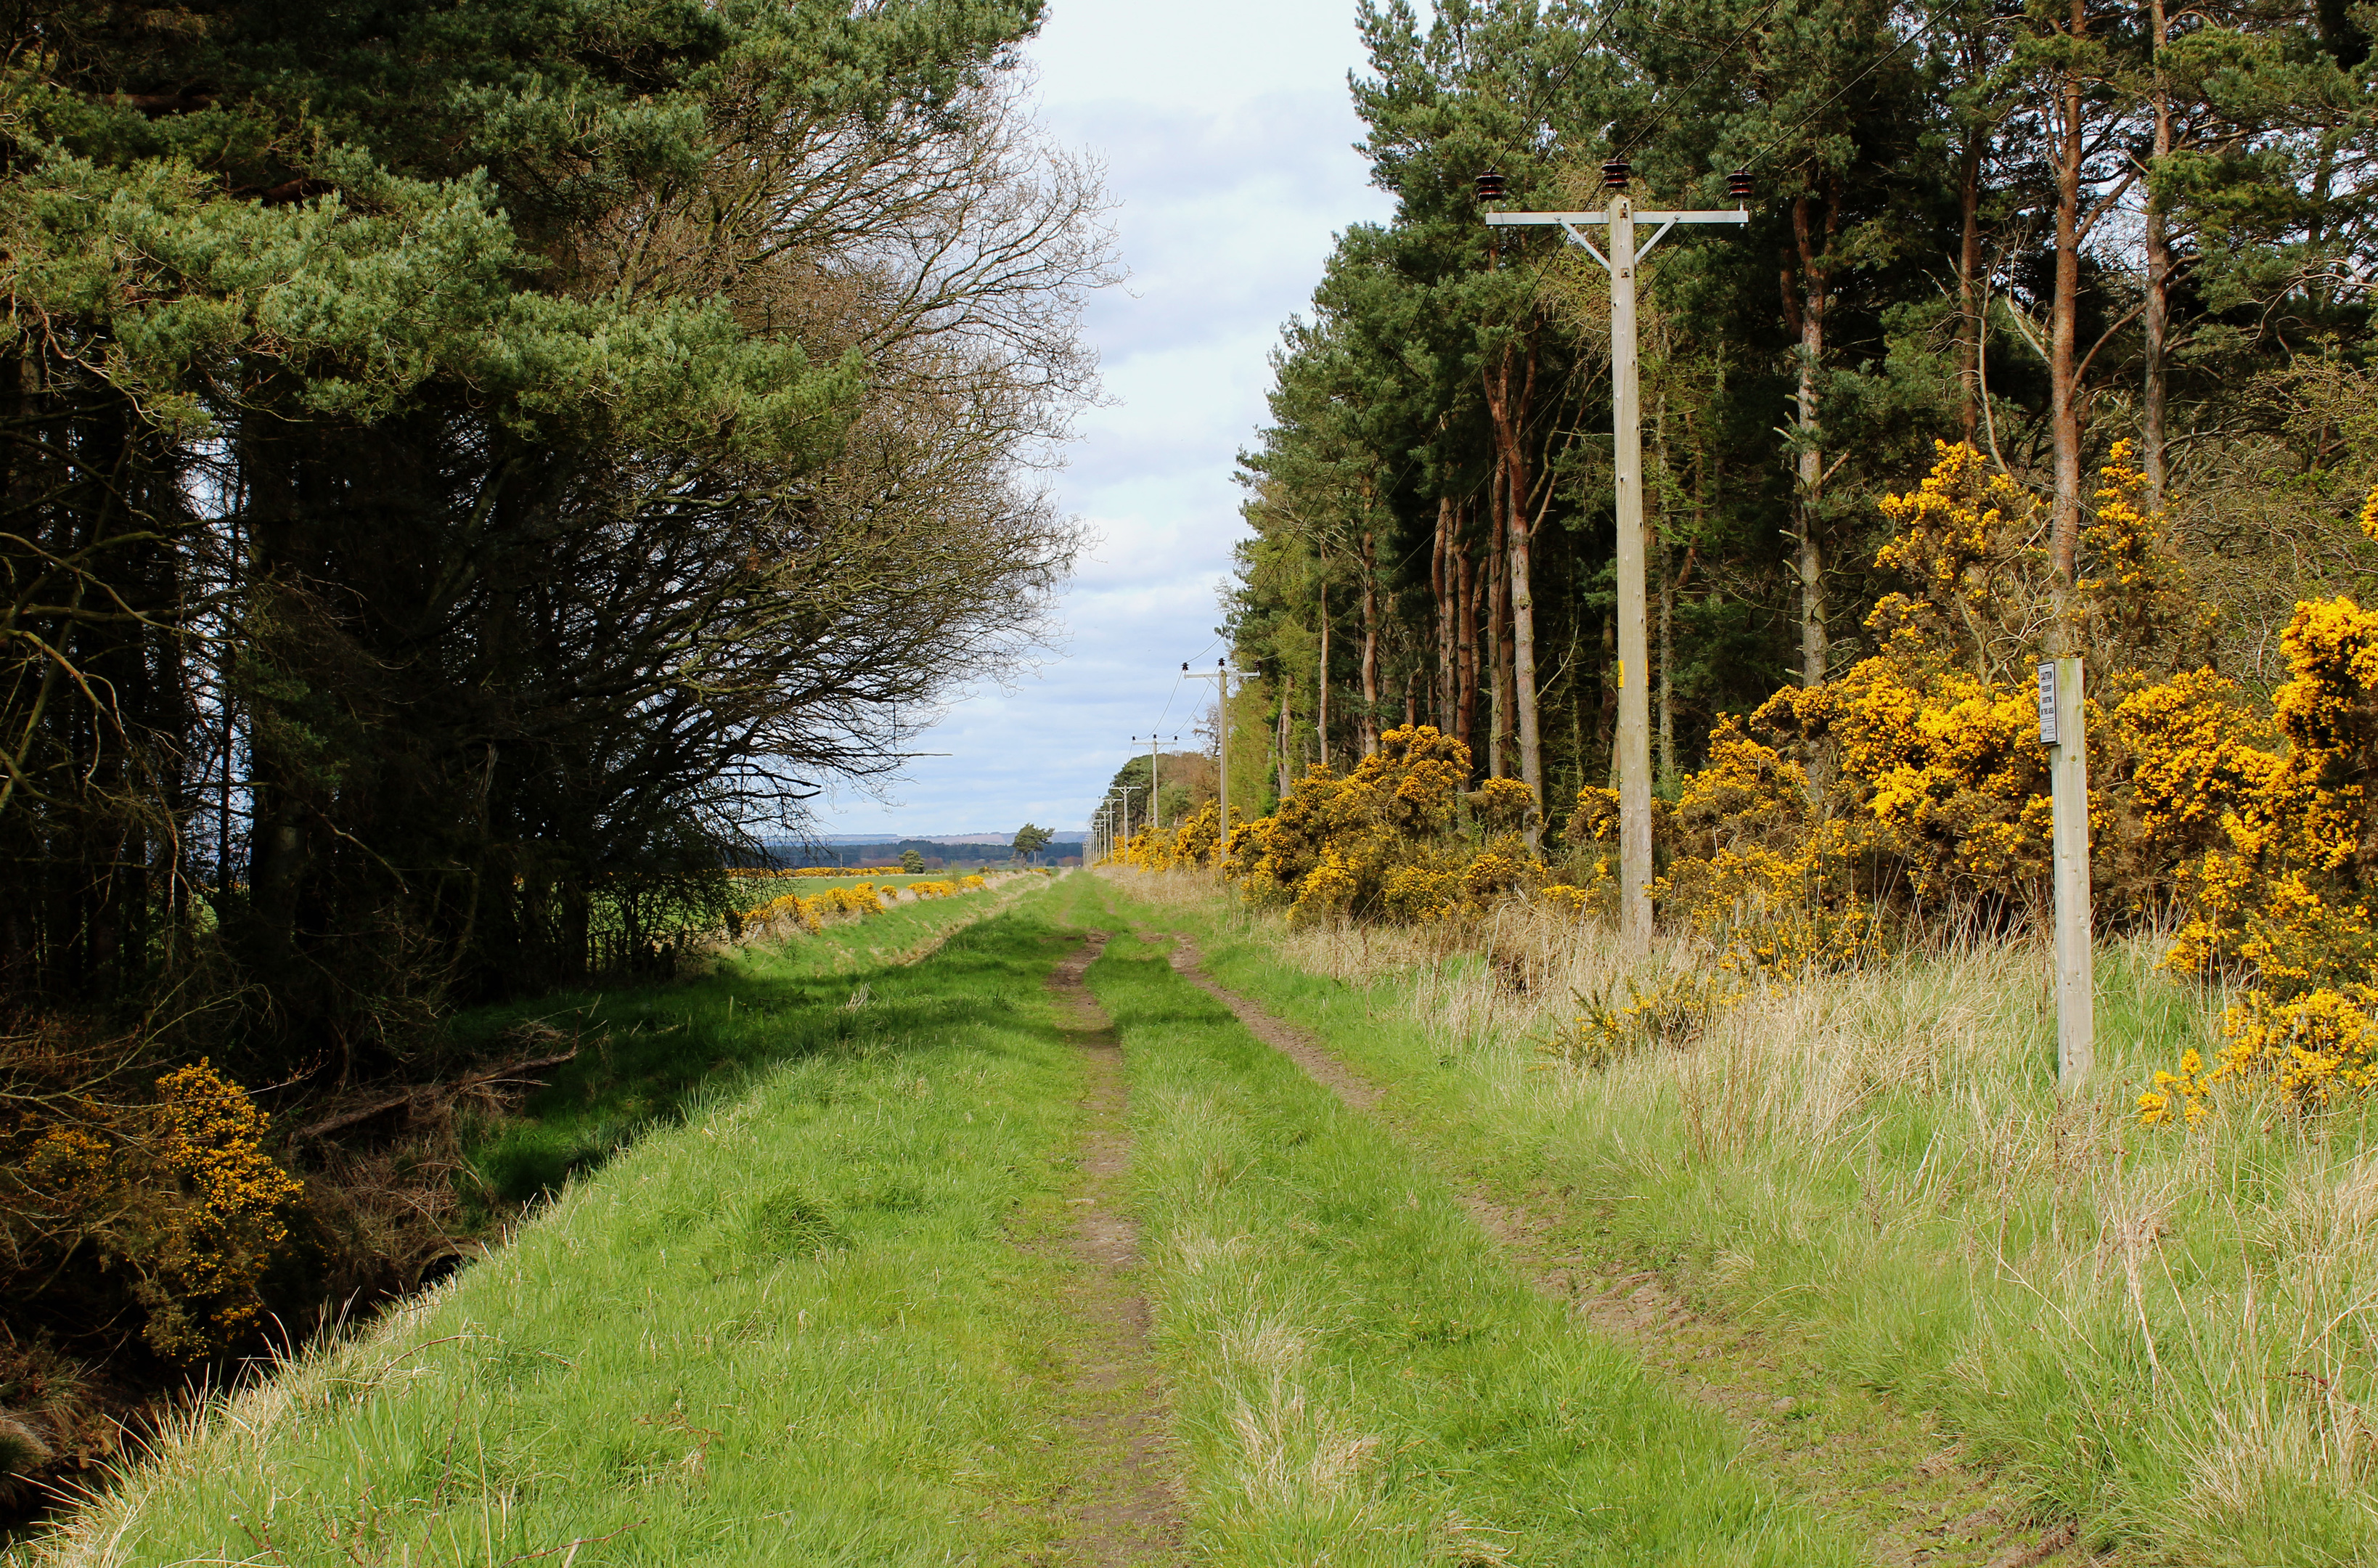 Track following course of old railway north from Leuchars.